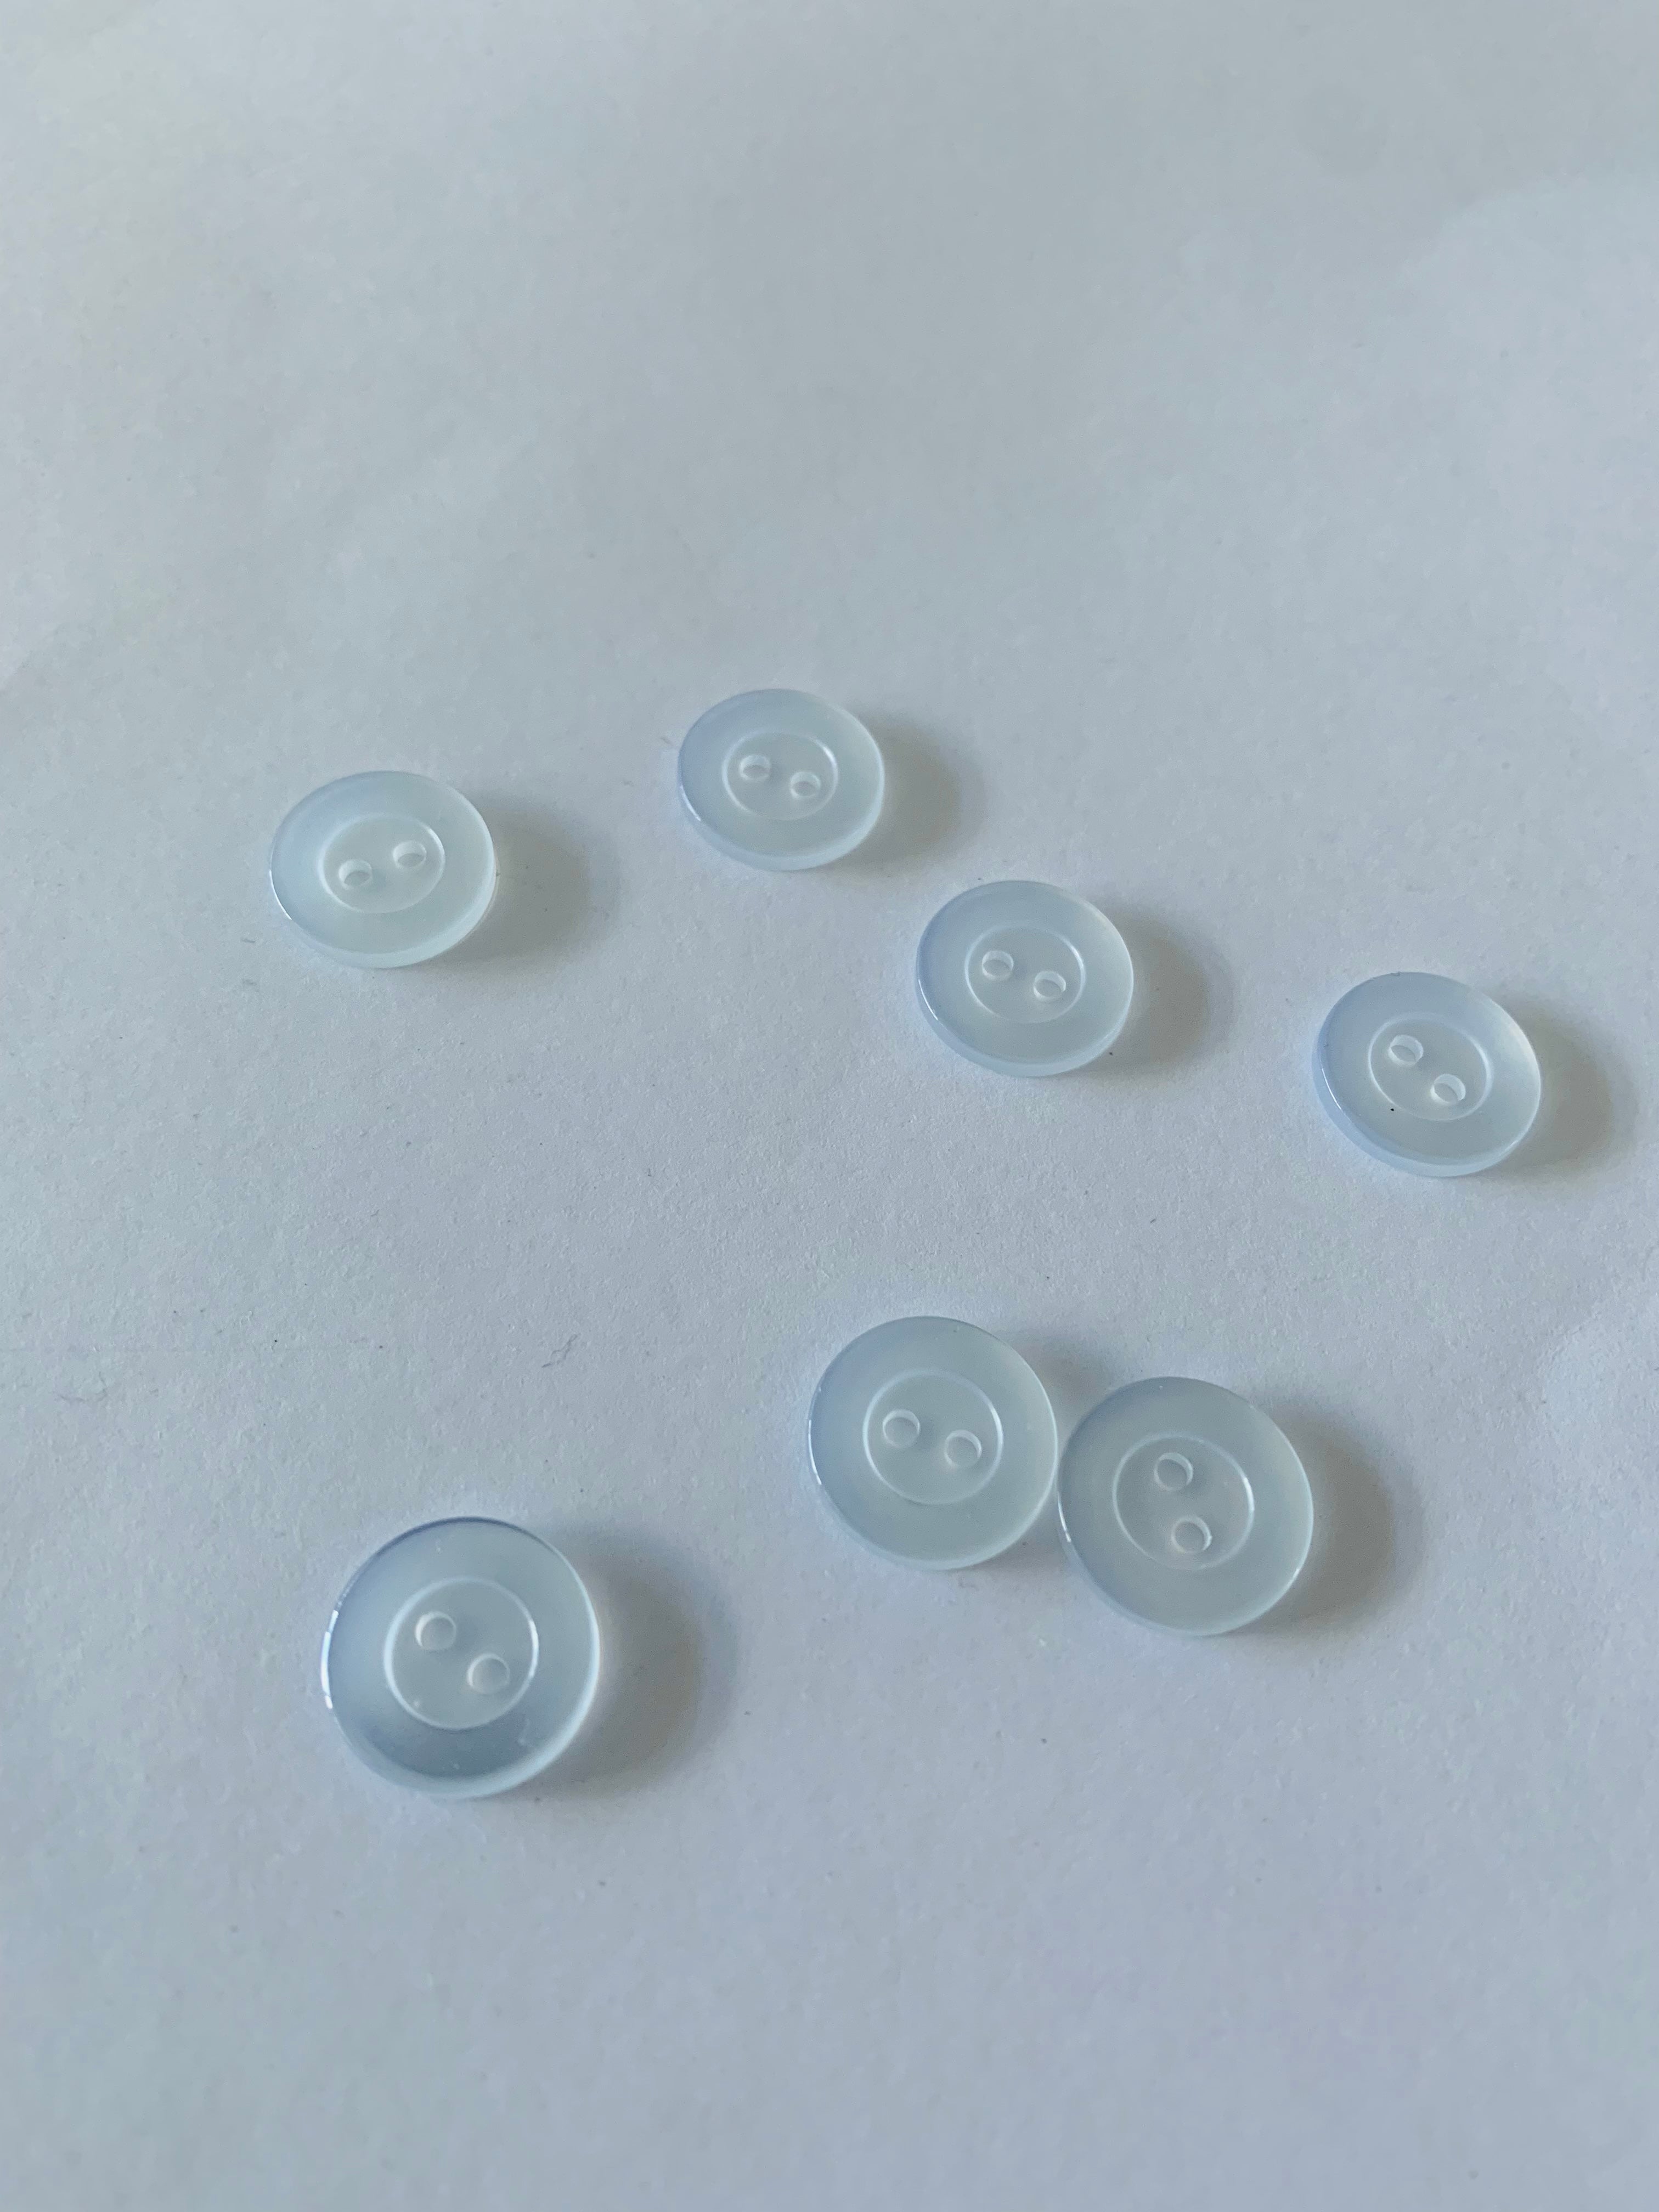 Simple translucent/white buttons: 15mm